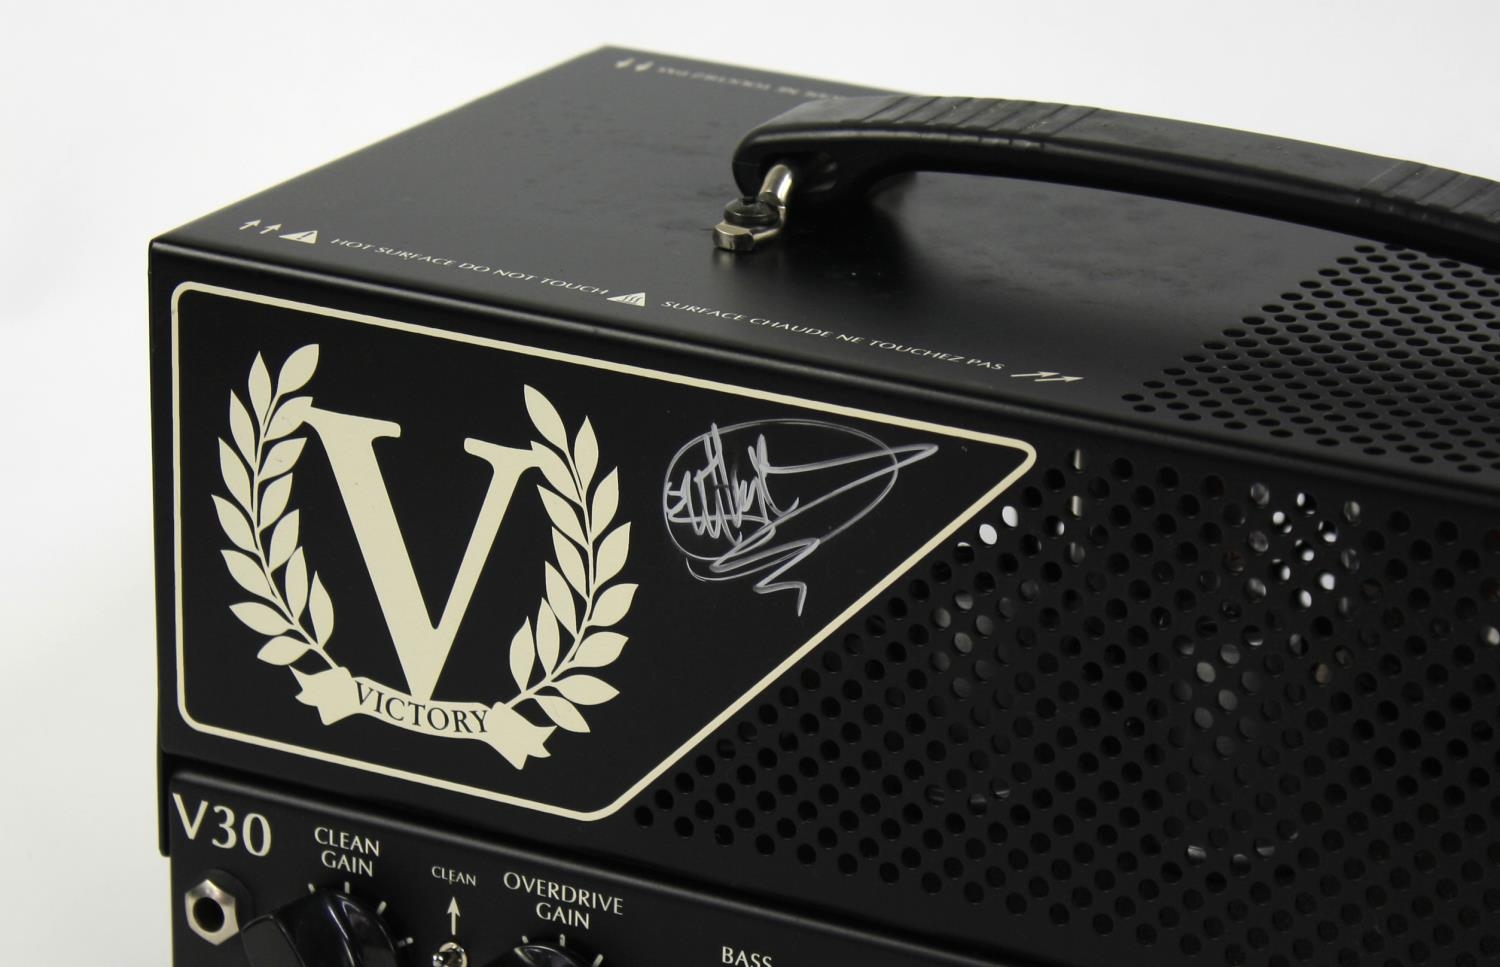 Guthrie Govan - a tour-used and autographed Victory V30 The Countess guitar amplifier, made in - Image 2 of 4